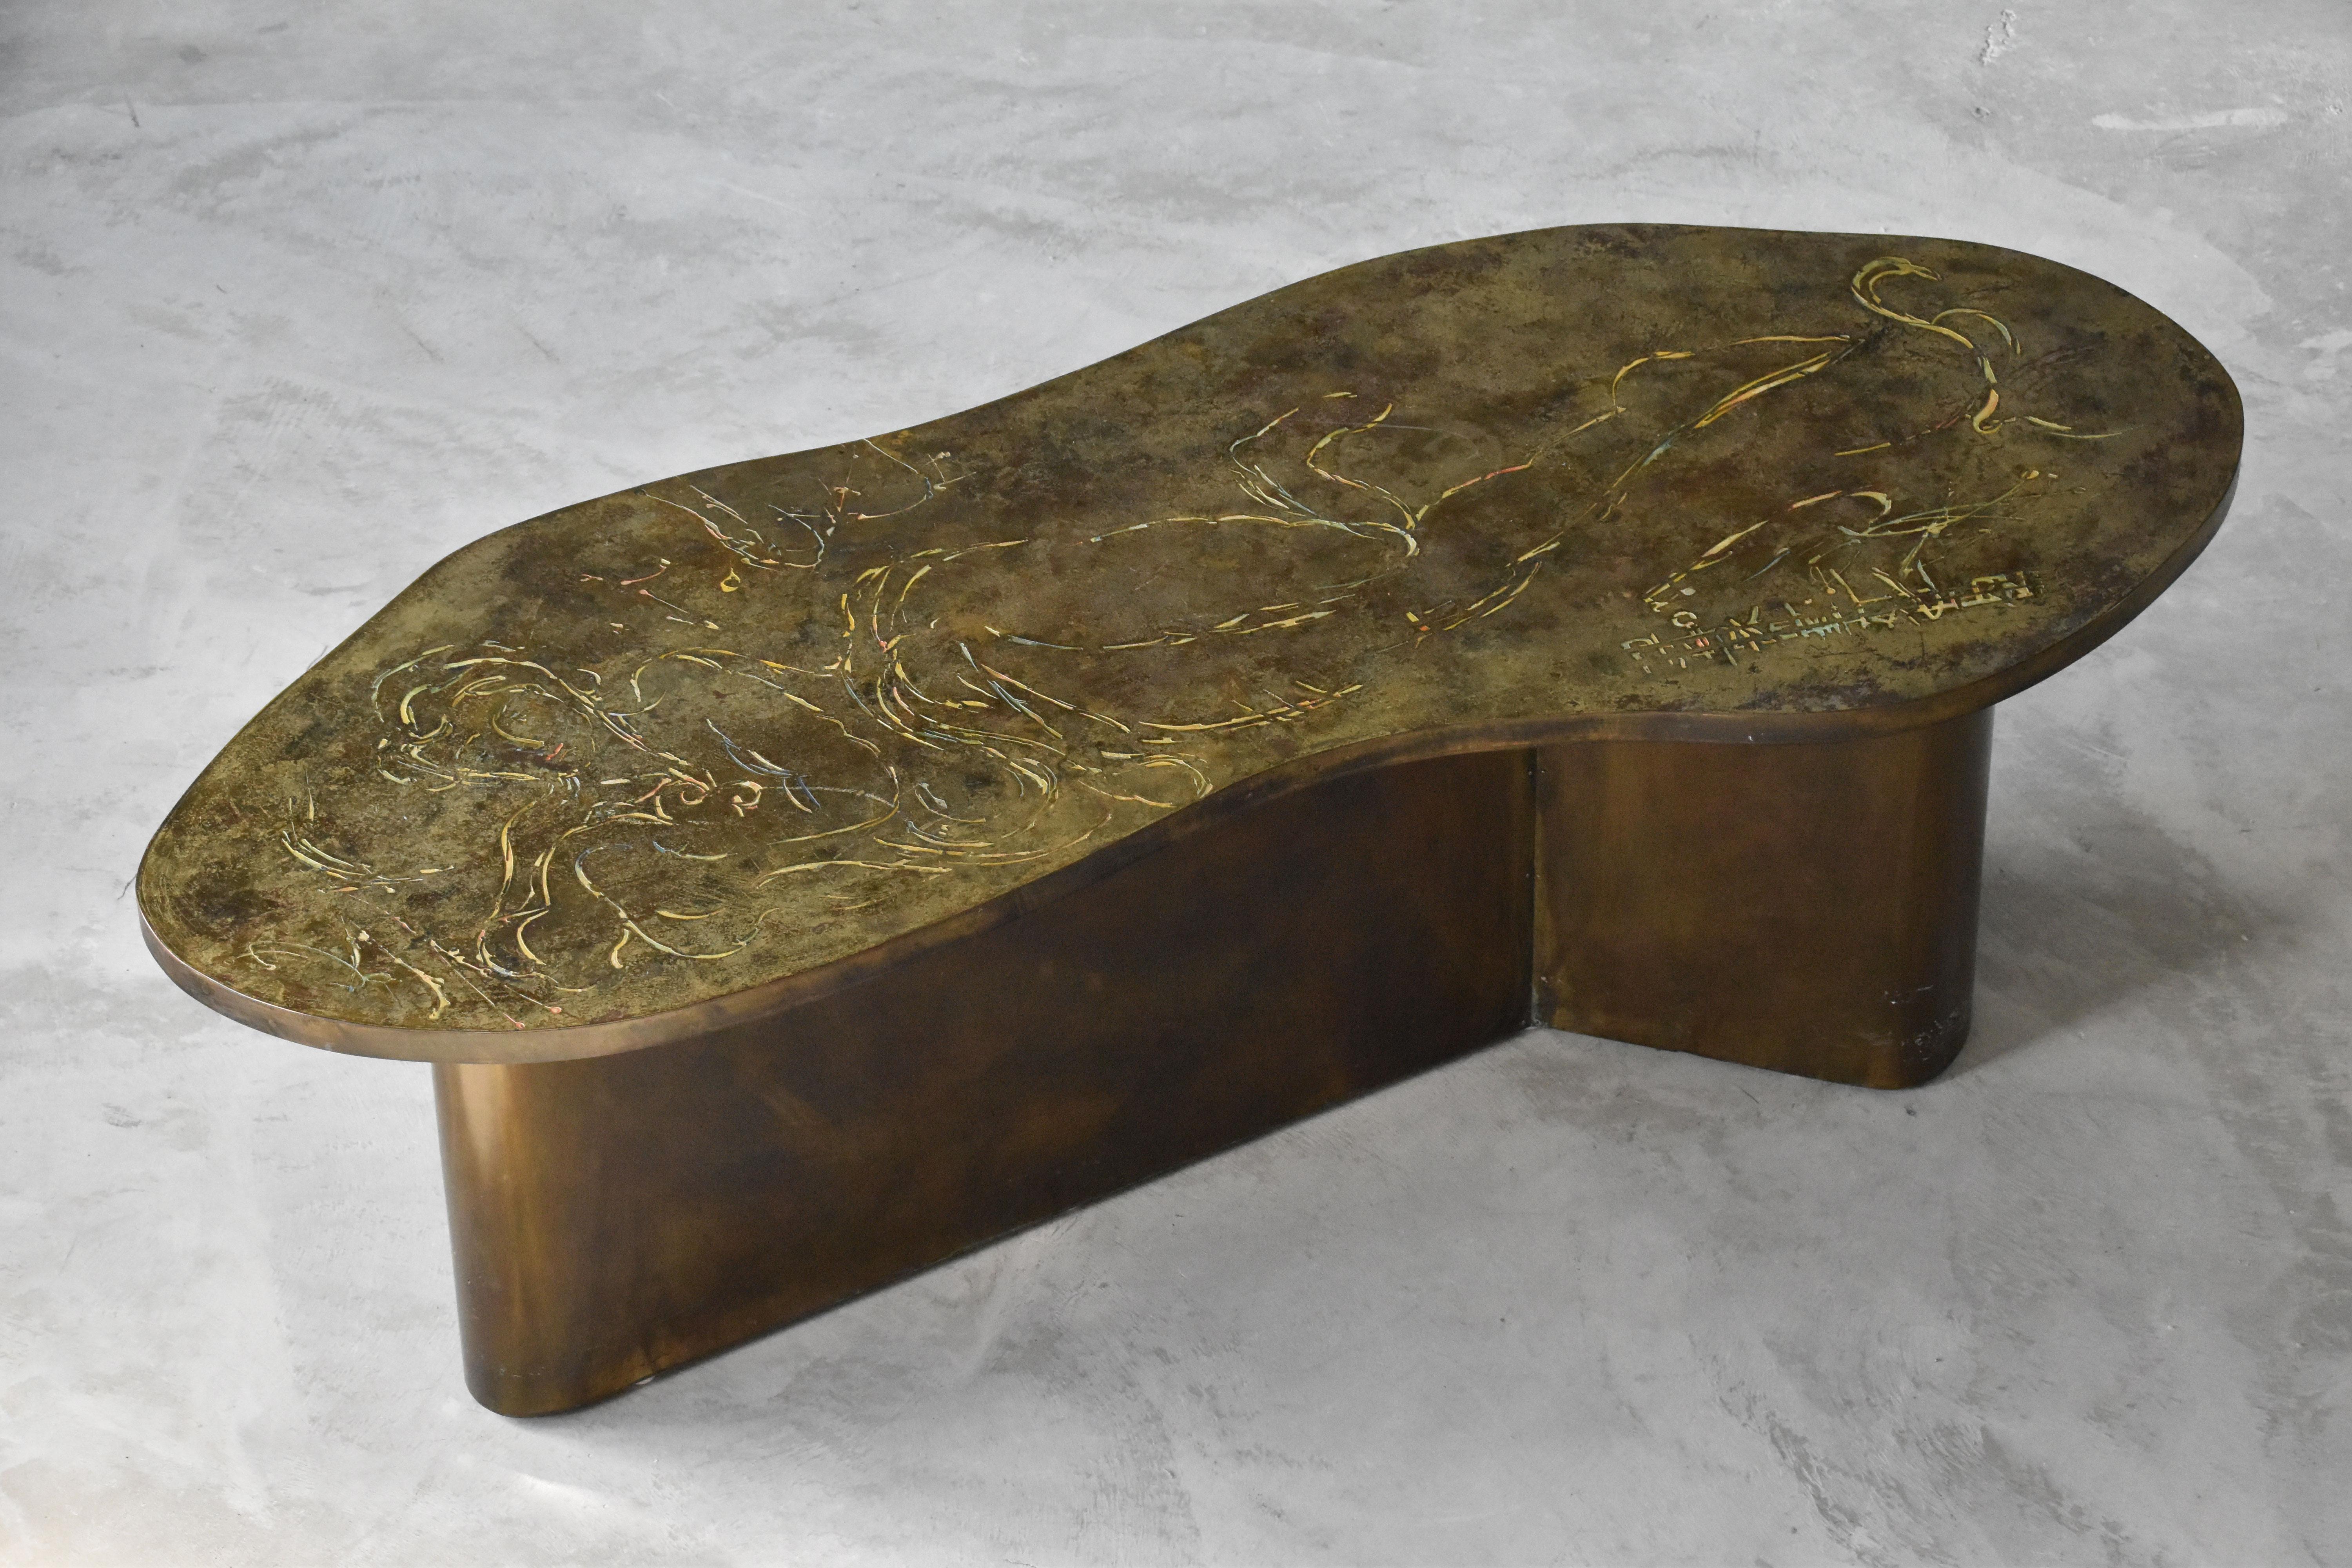 A studio-produced freeform coffee / cocktail table by Philip & Kelvin LaVerne. Produced in acid-etched and patinated brass over pewter and wood. Top with engraved motif of Leda and the Swan. Artists signature is engraved in the top. 

Artists